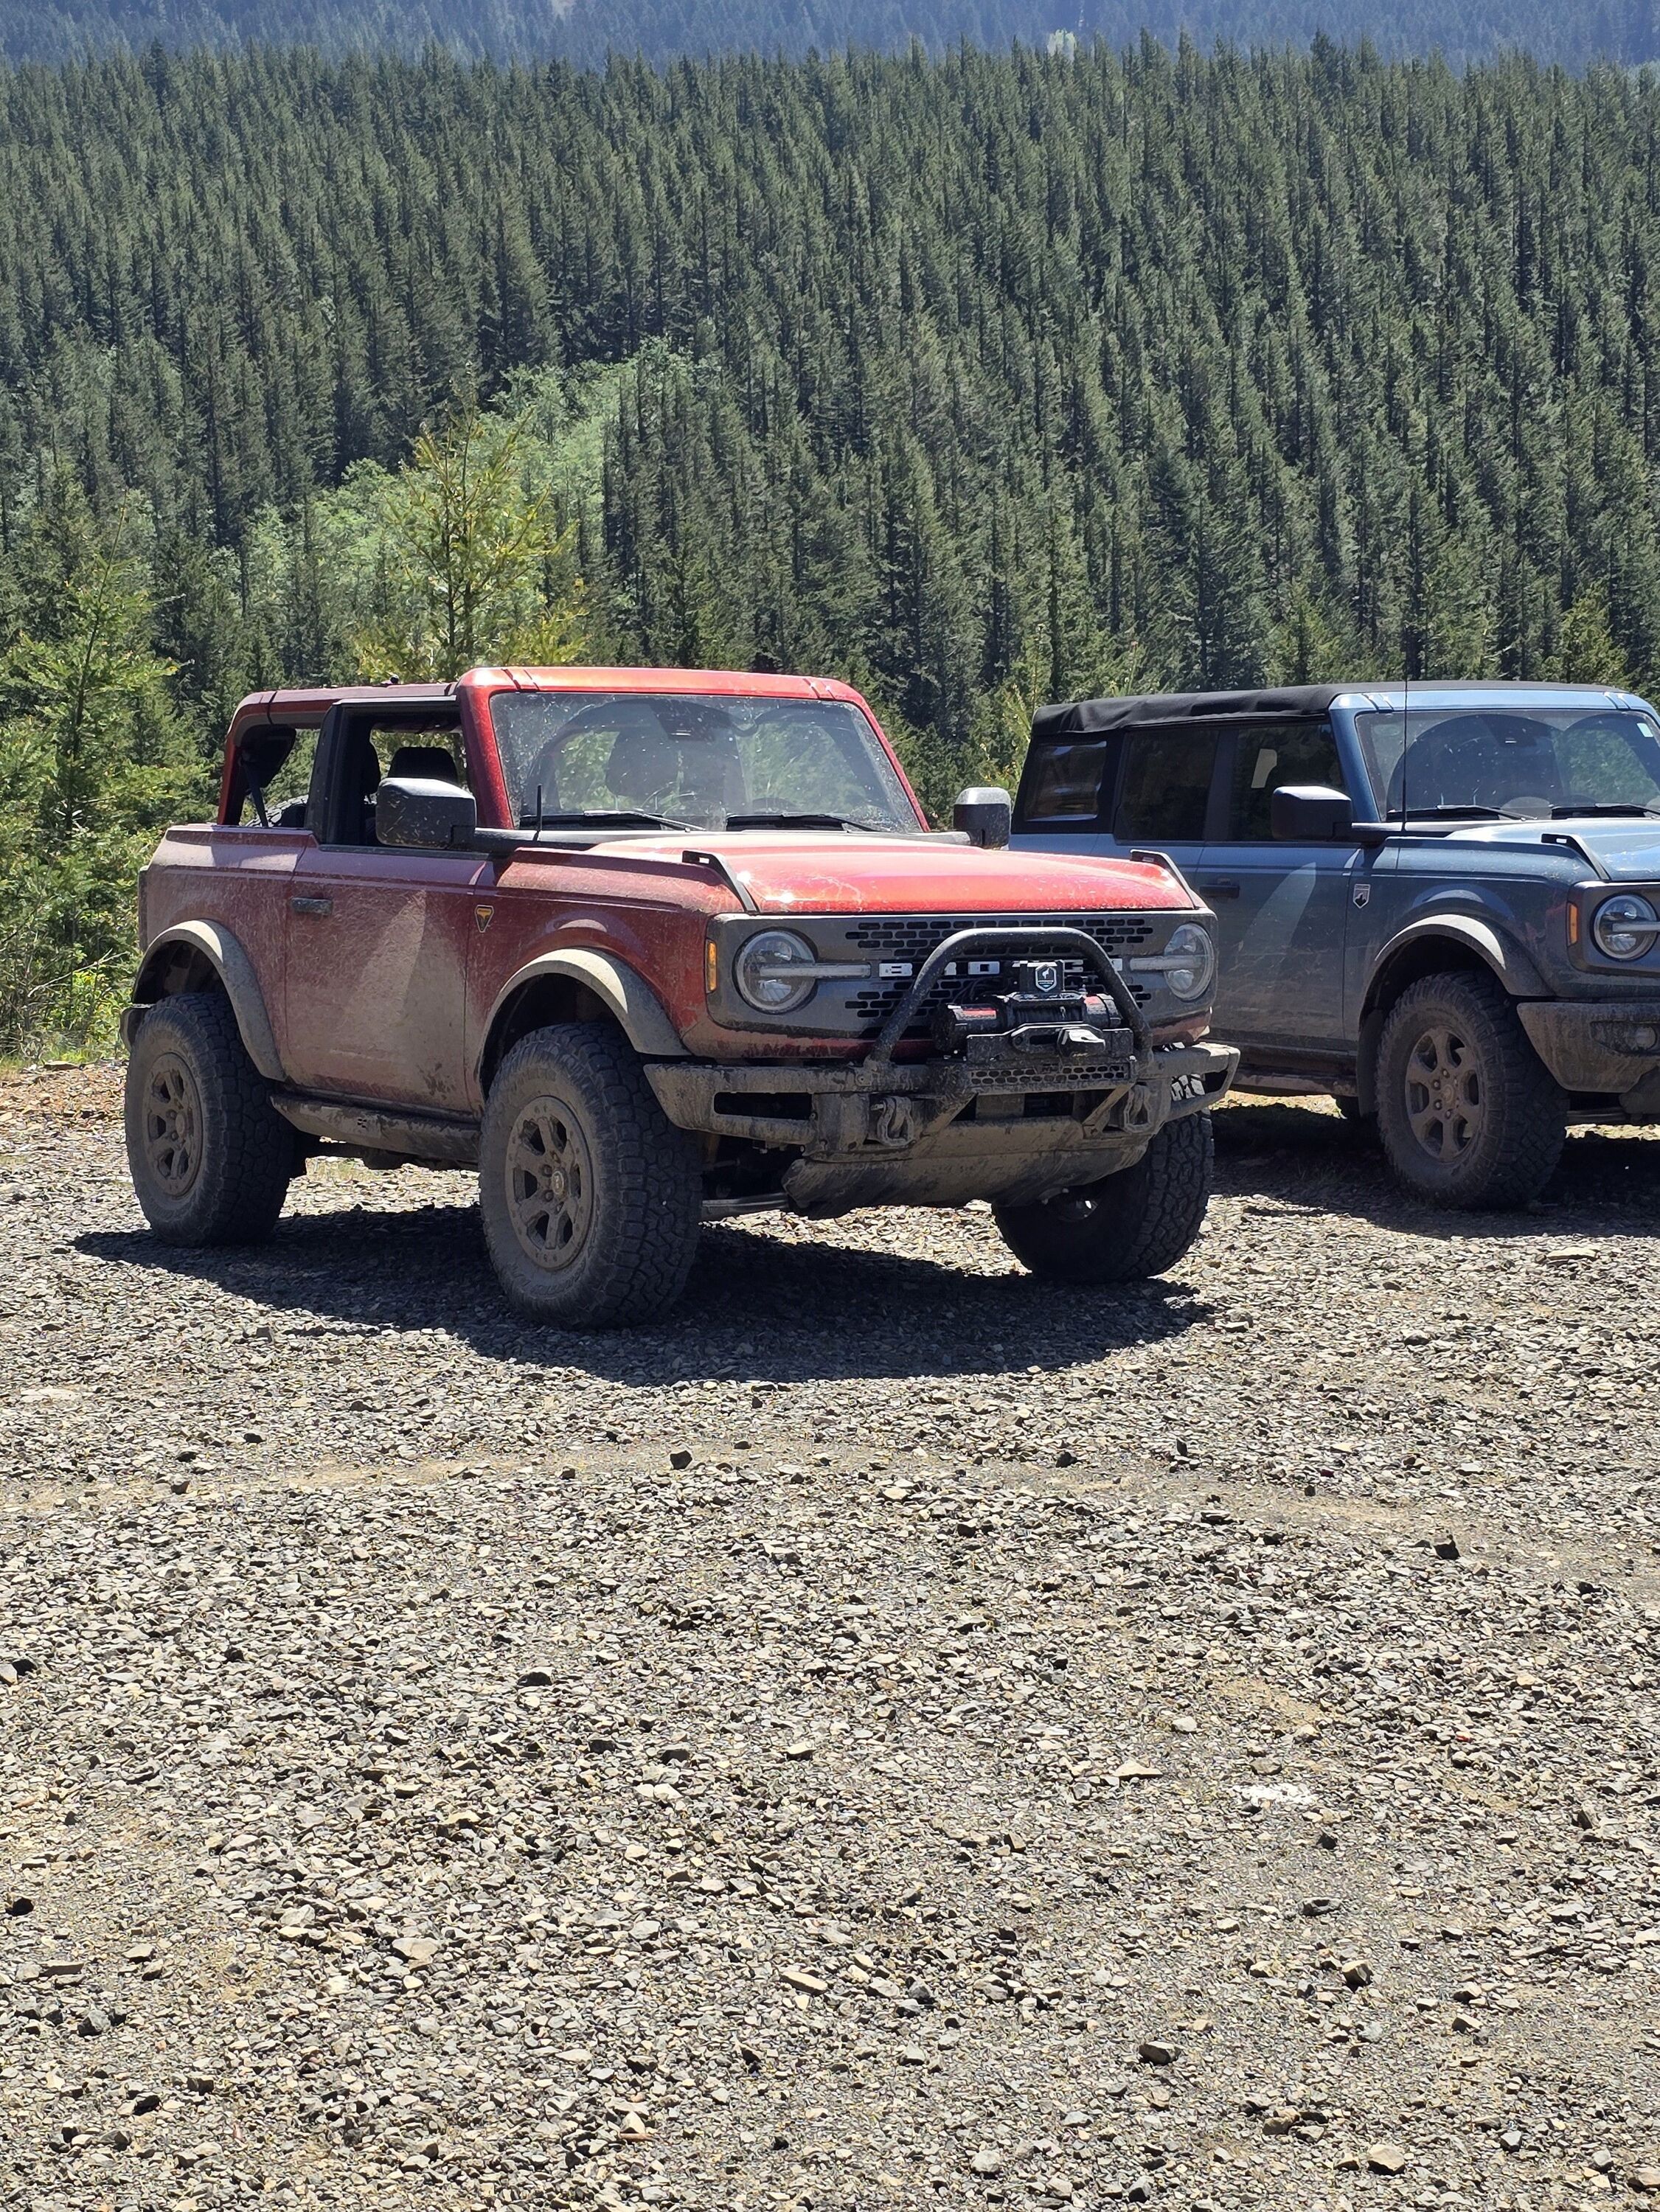 Ford Bronco My Gifford National Forest Camping and 4x4 Trip: (photo HEAVY) data